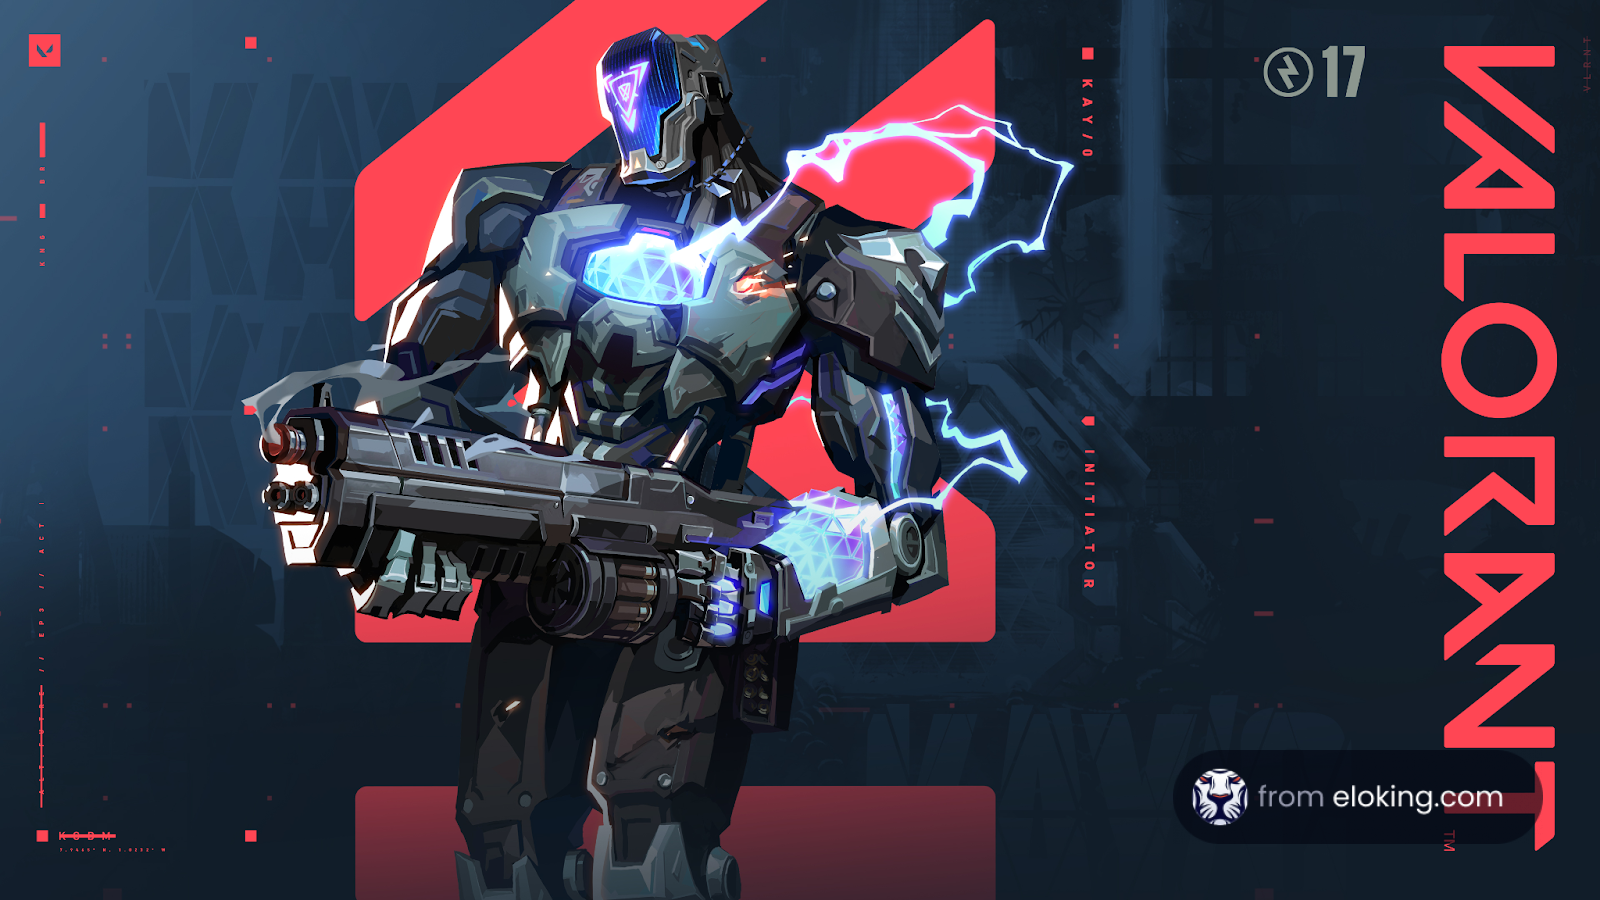 Futuristic robot soldier with an energy weapon in a combat pose